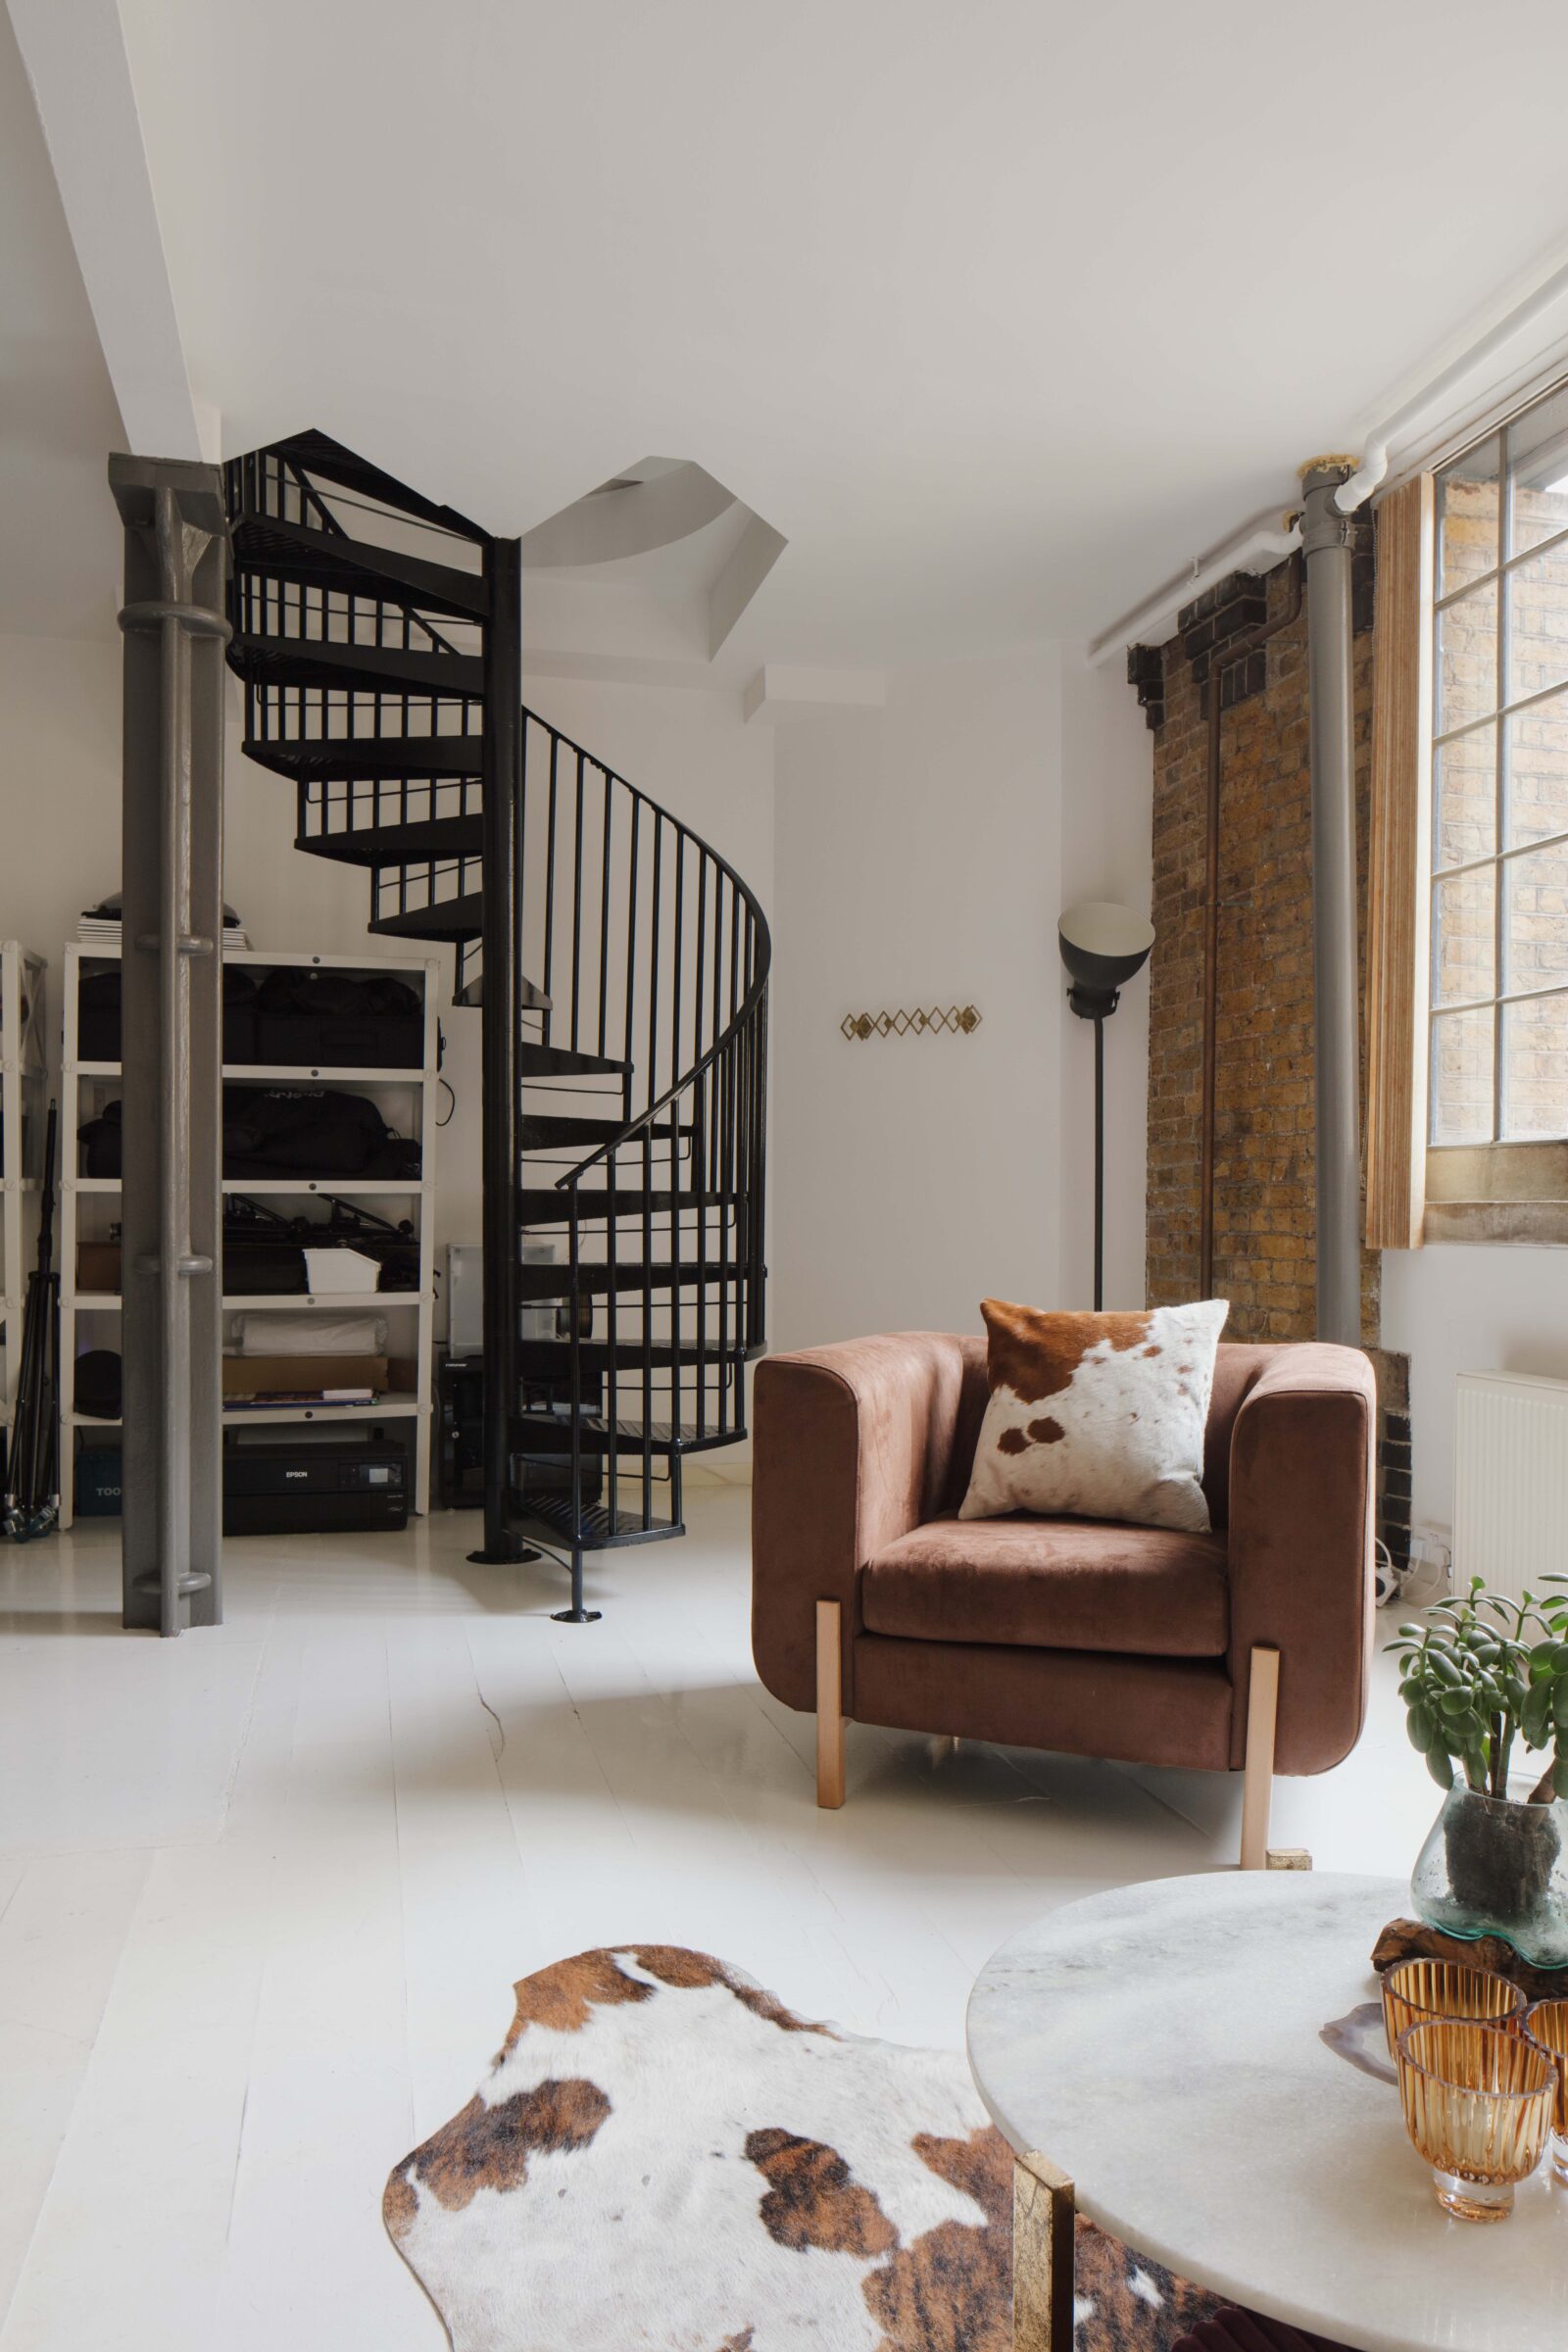 London loft living room with metal staircase